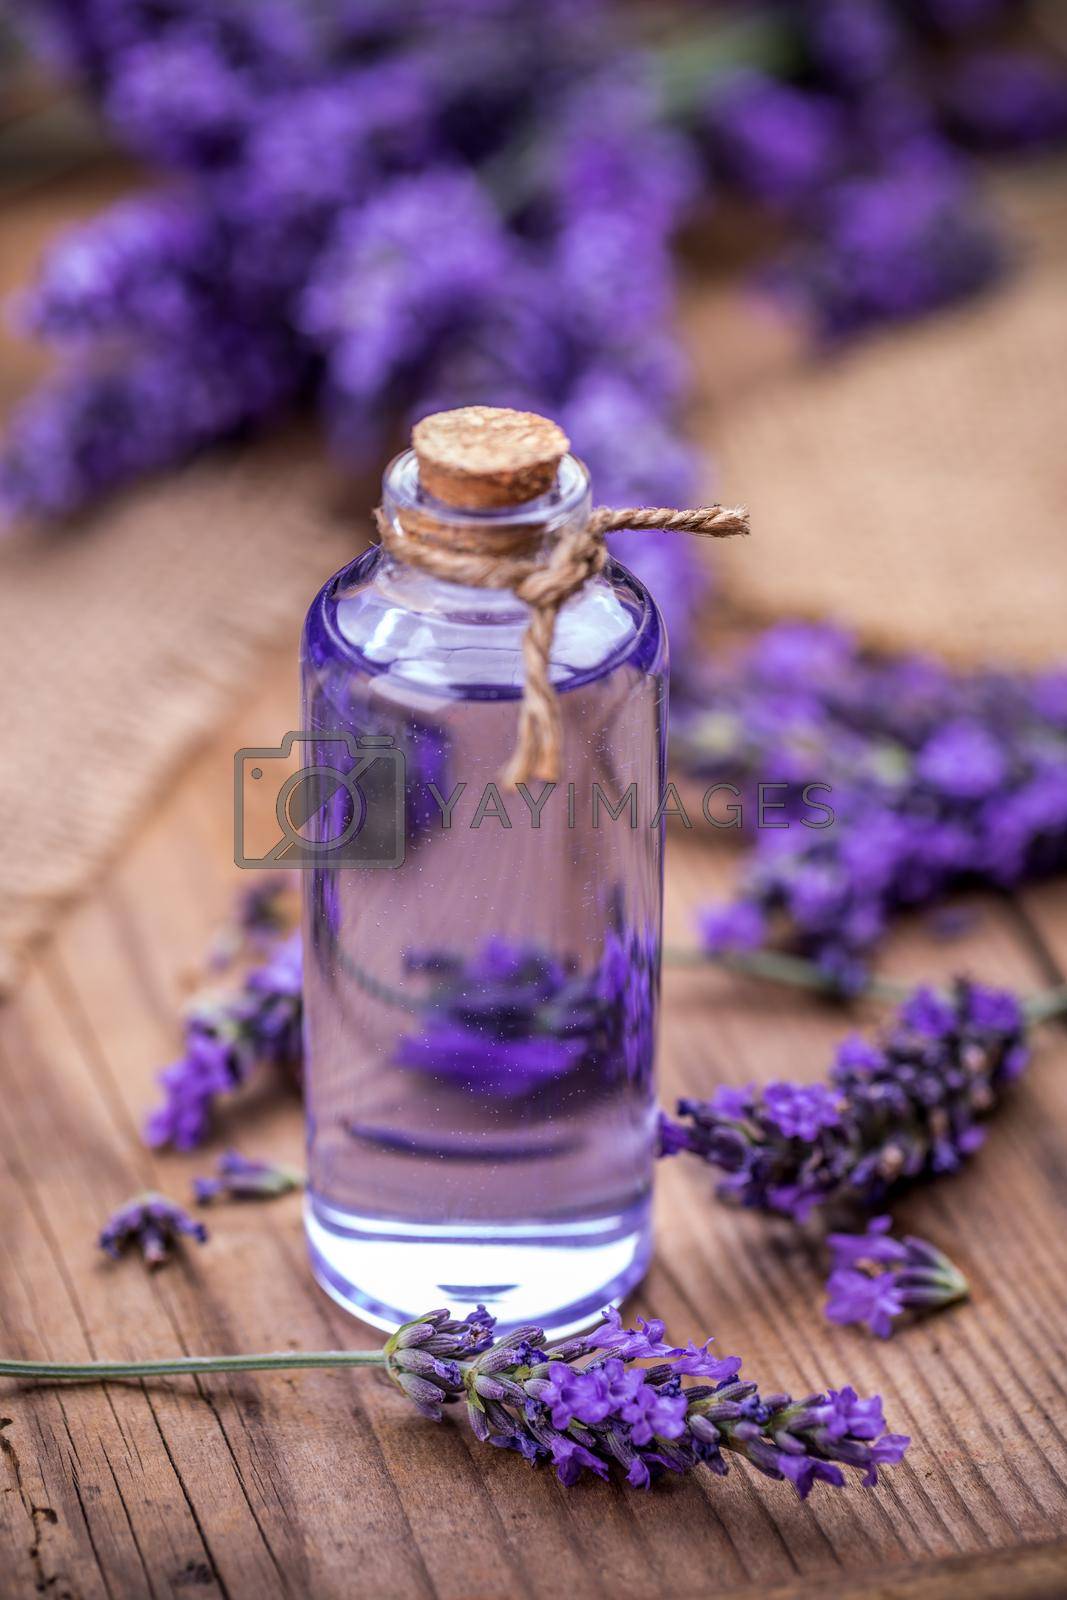 Spa massage oil and fresh lavender flowers